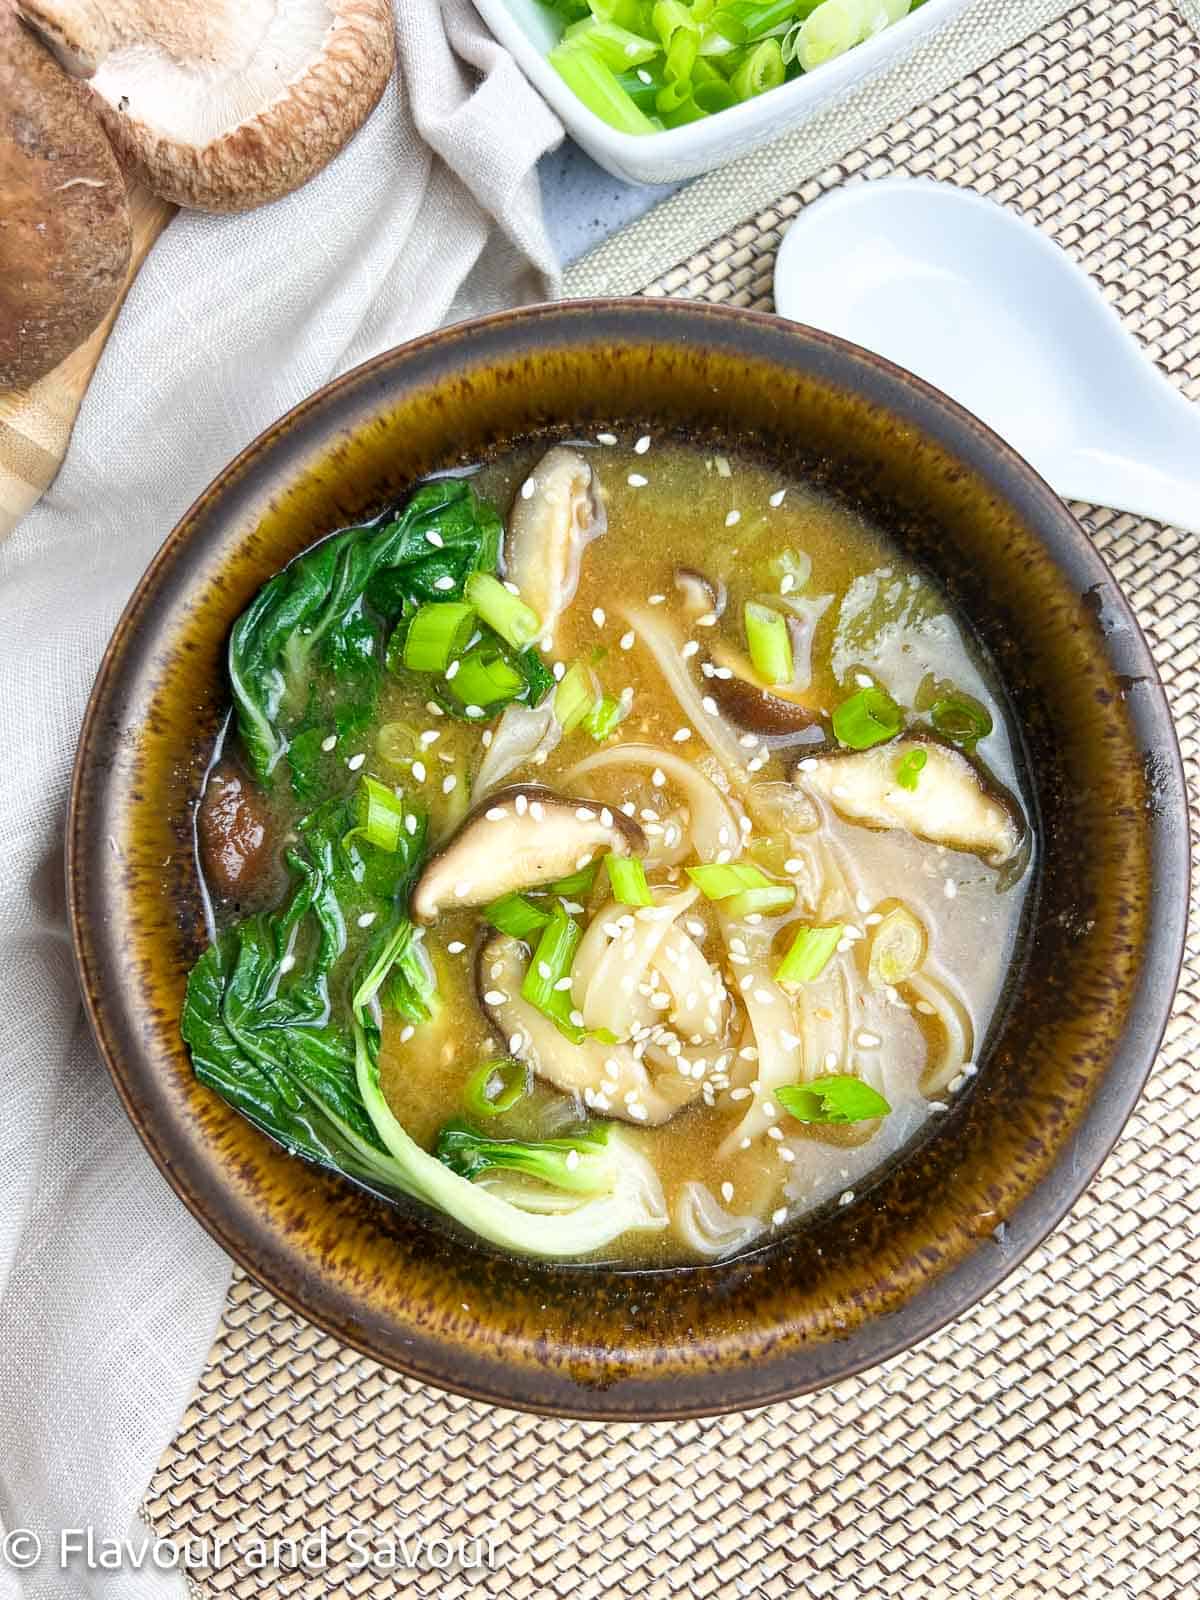 Miso noodle soup with shiitake mushrooms, oyster mushrooms and baby bok choy in a brown stoneware bowl.